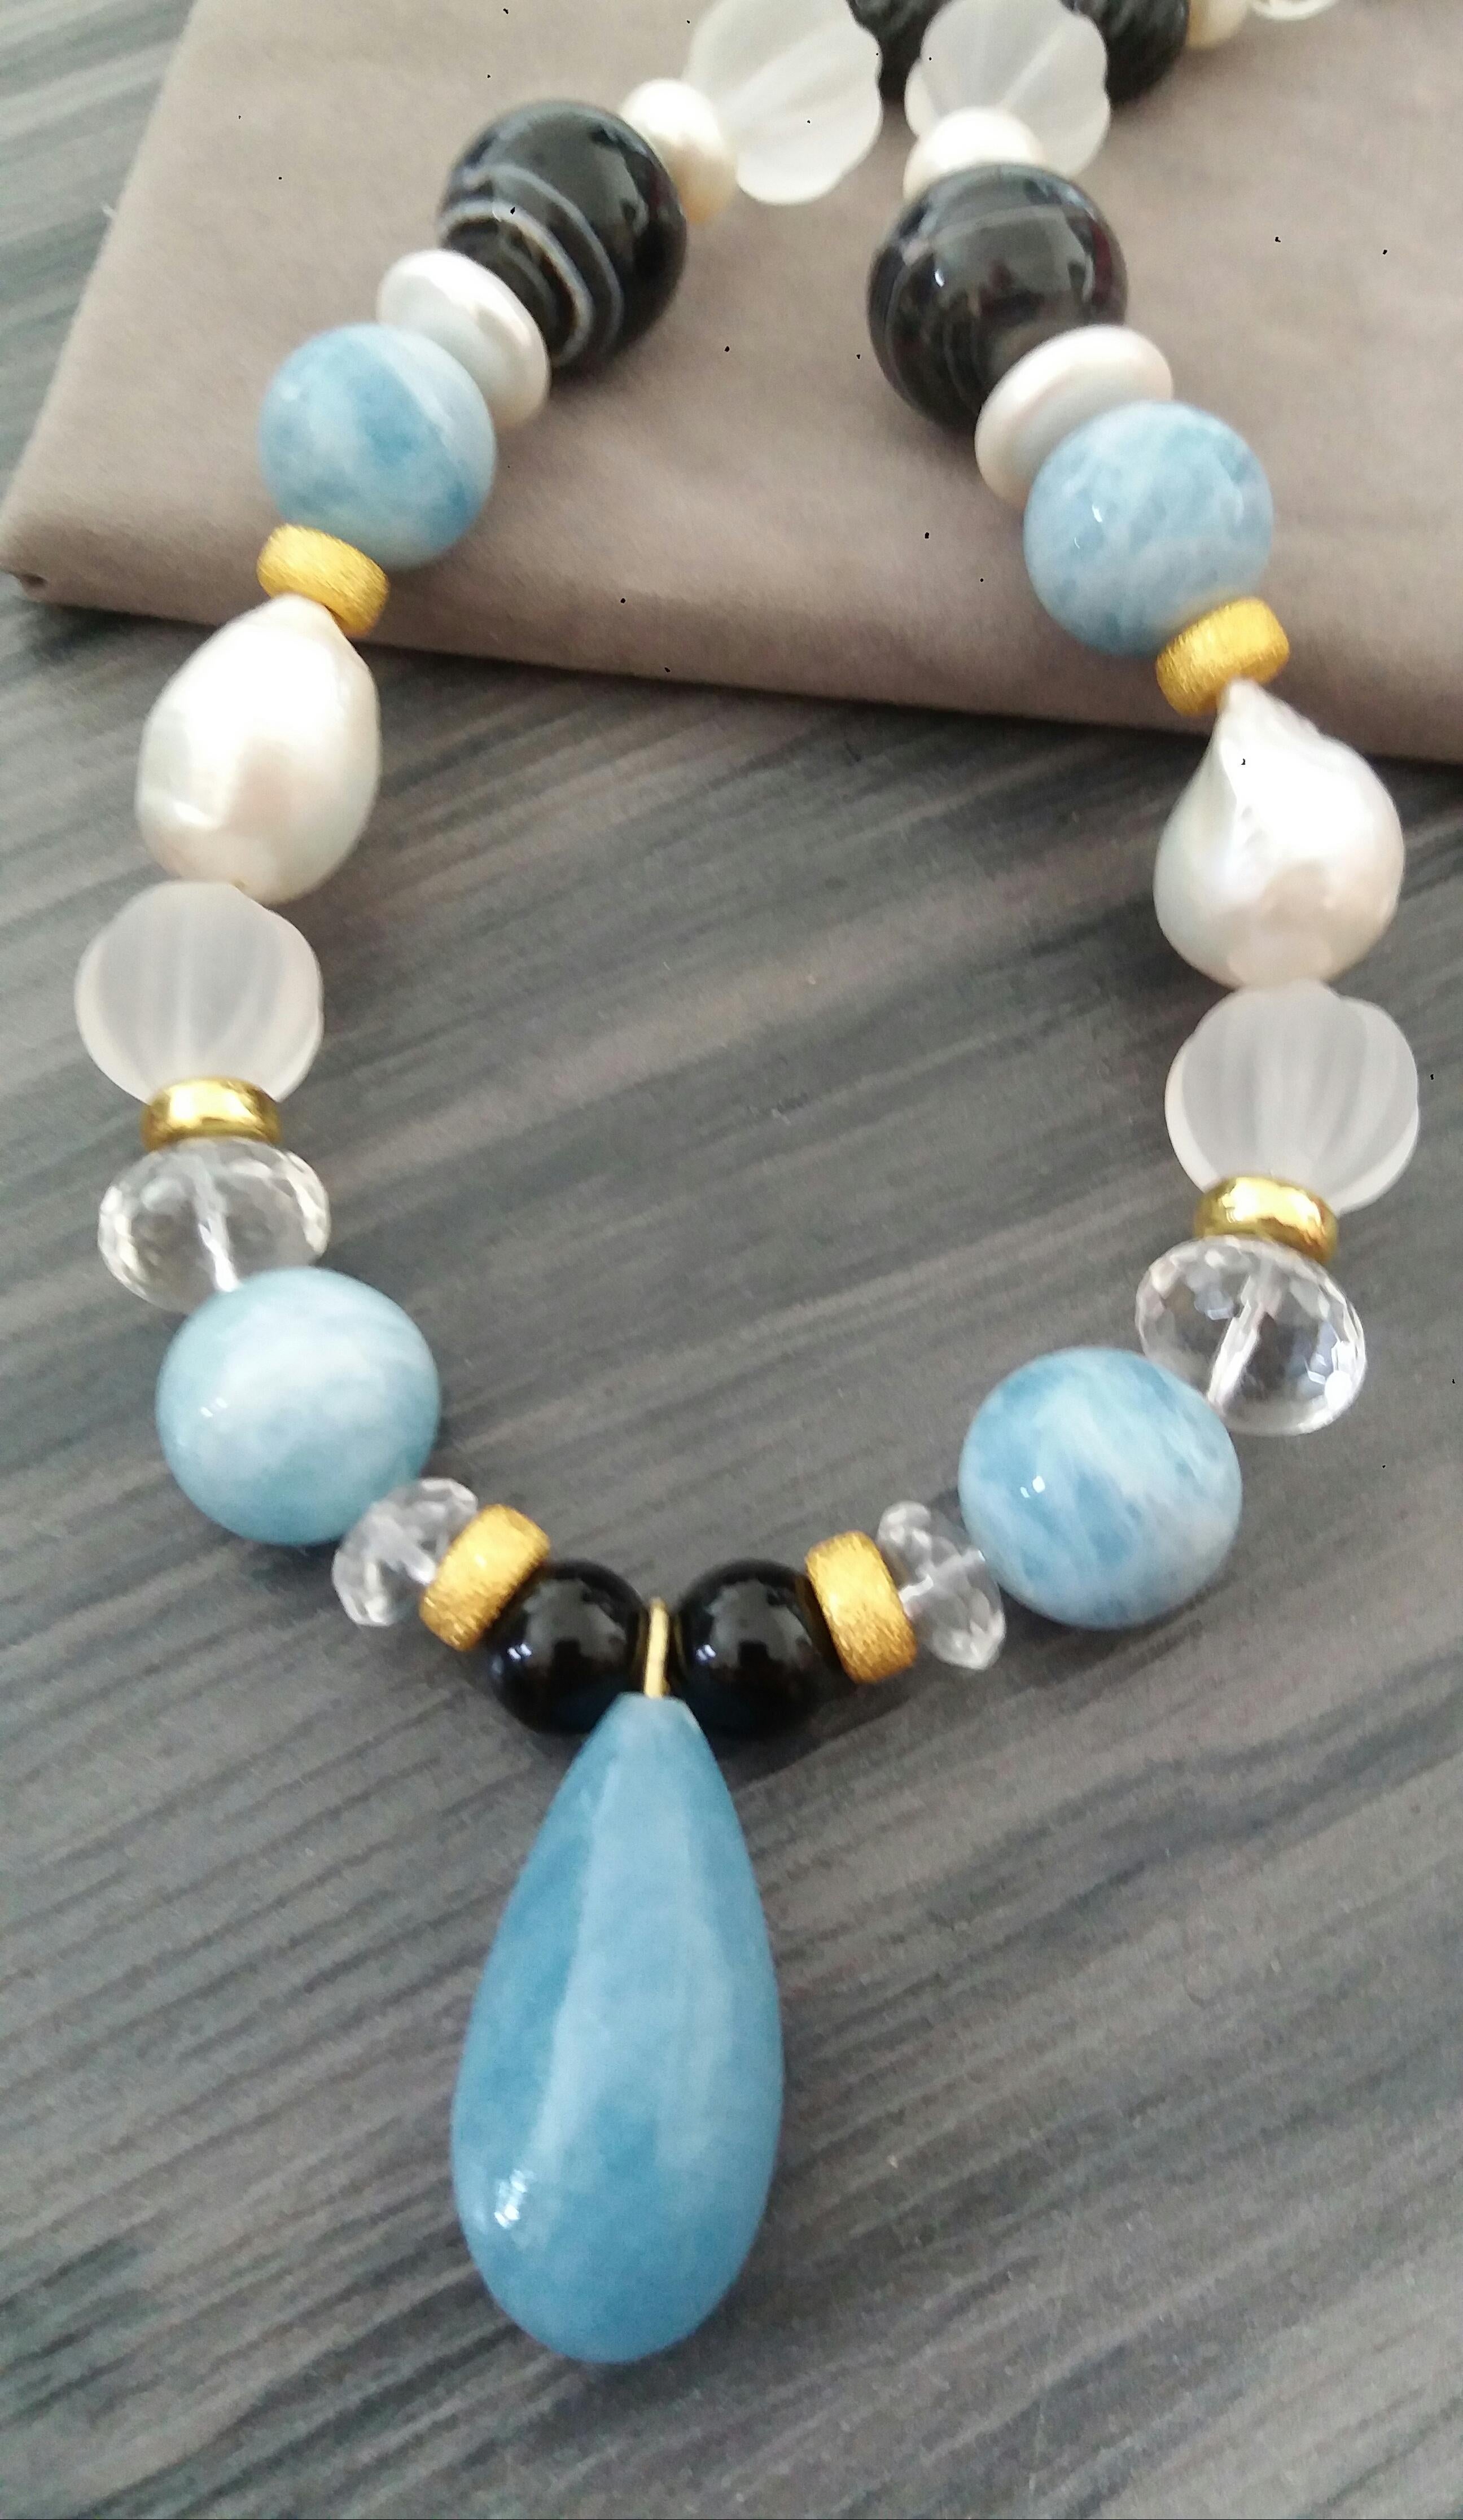 Aquamarine Beads And Pendant Baroque Pearls Quartz Onyx Yellow Gold Necklace For Sale 7